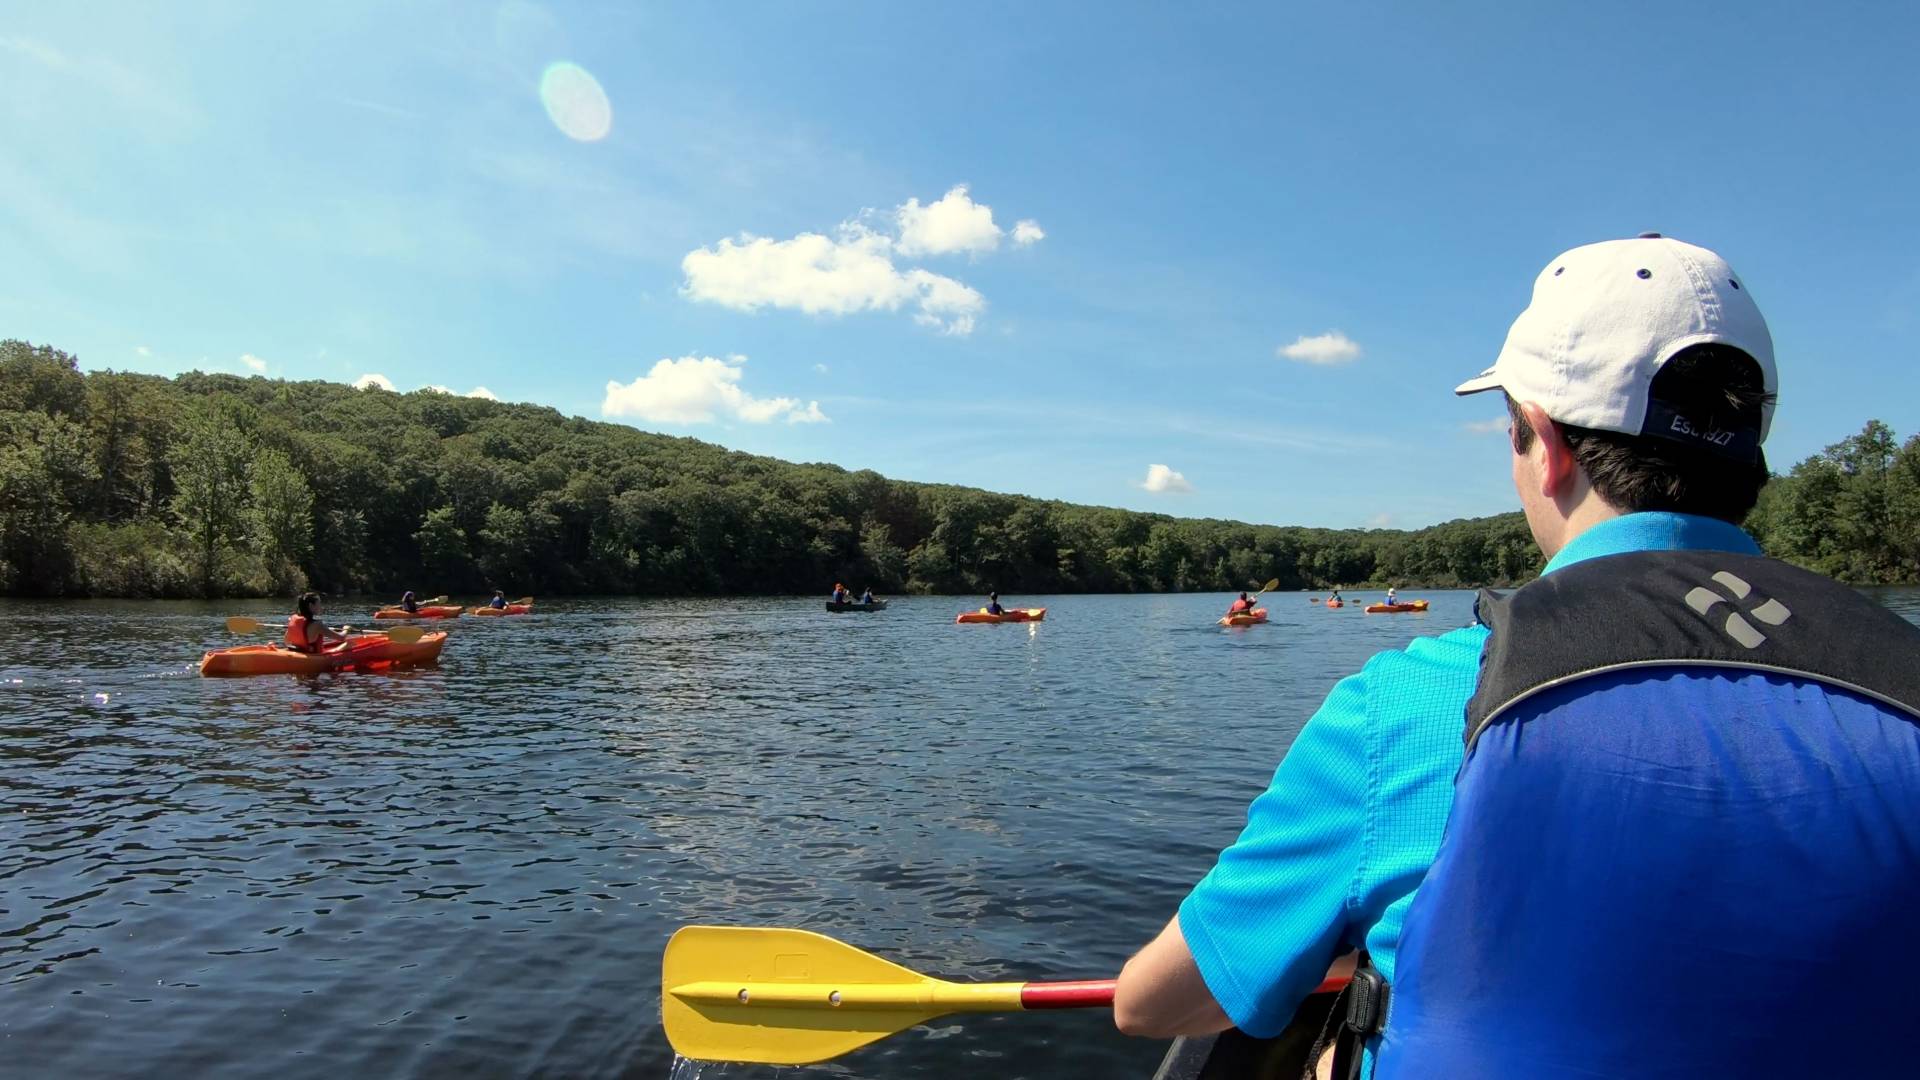 Students canoeing and kayaking on lake in Harriman State Park